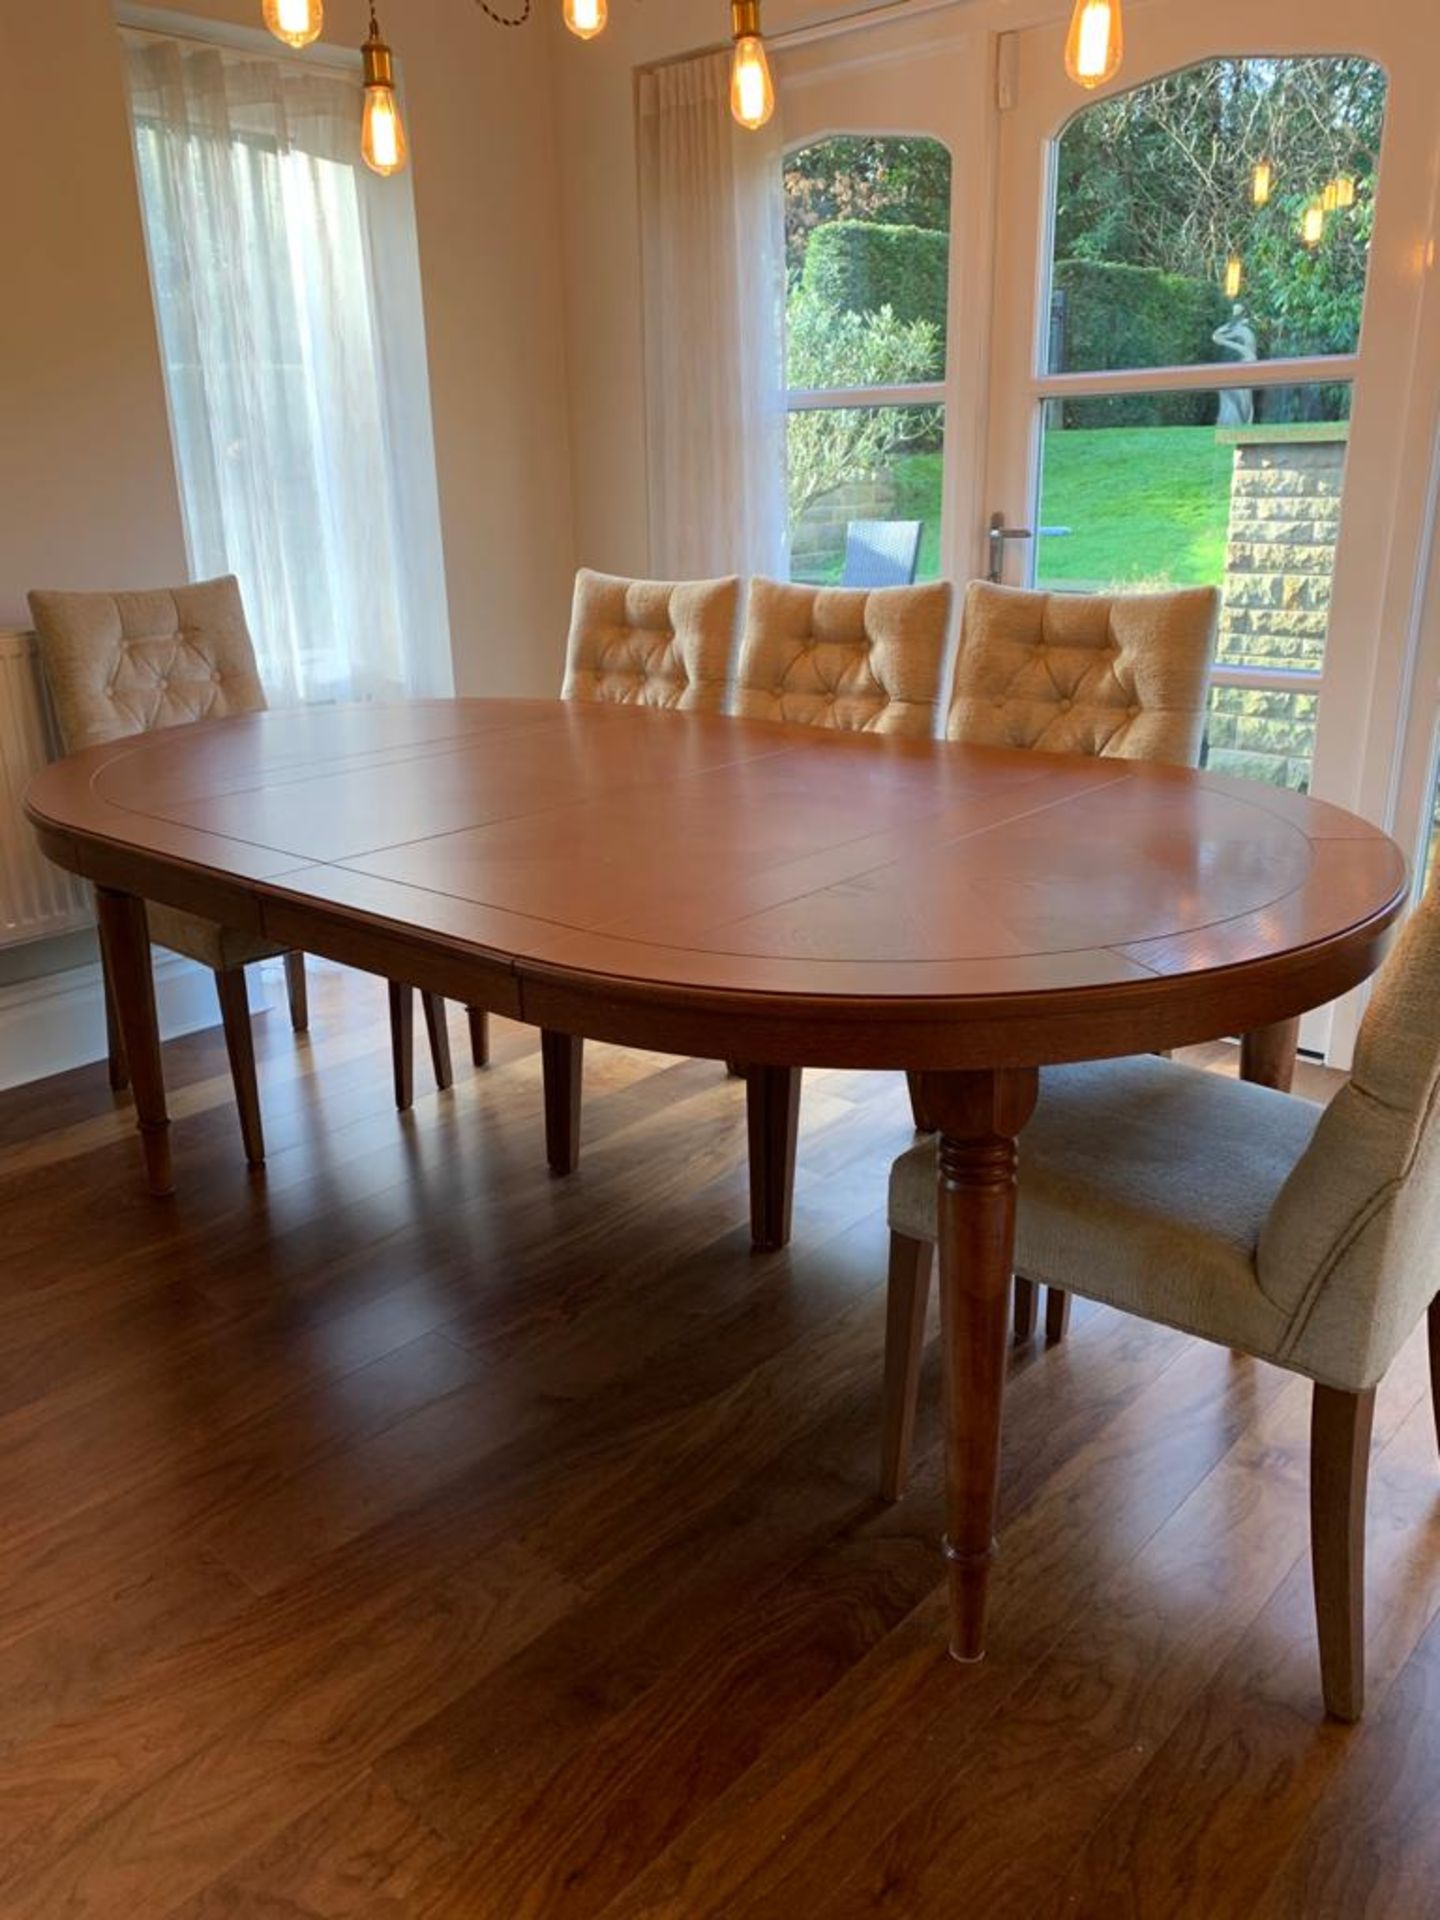 1 x Large Wooden Extending Dining Table With Leaves - Dimensions: 207cm Extended / 120cm